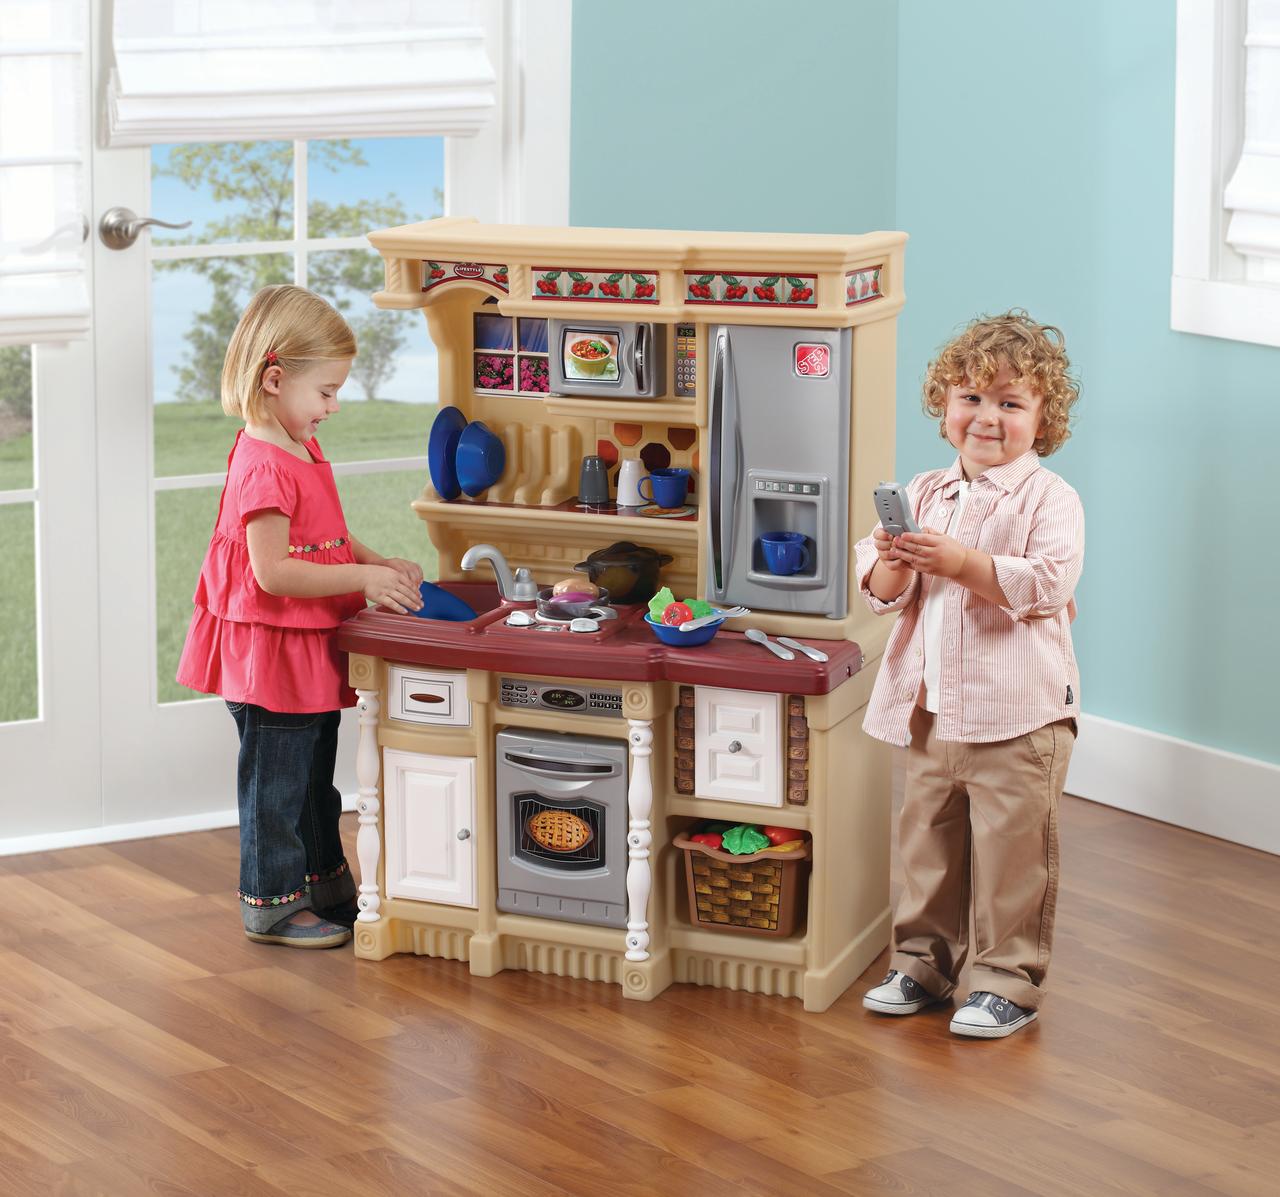 Step2 LifeStyle Custom Play Kitchen with 20 Piece Accessory Play Set - Tan - image 1 of 3